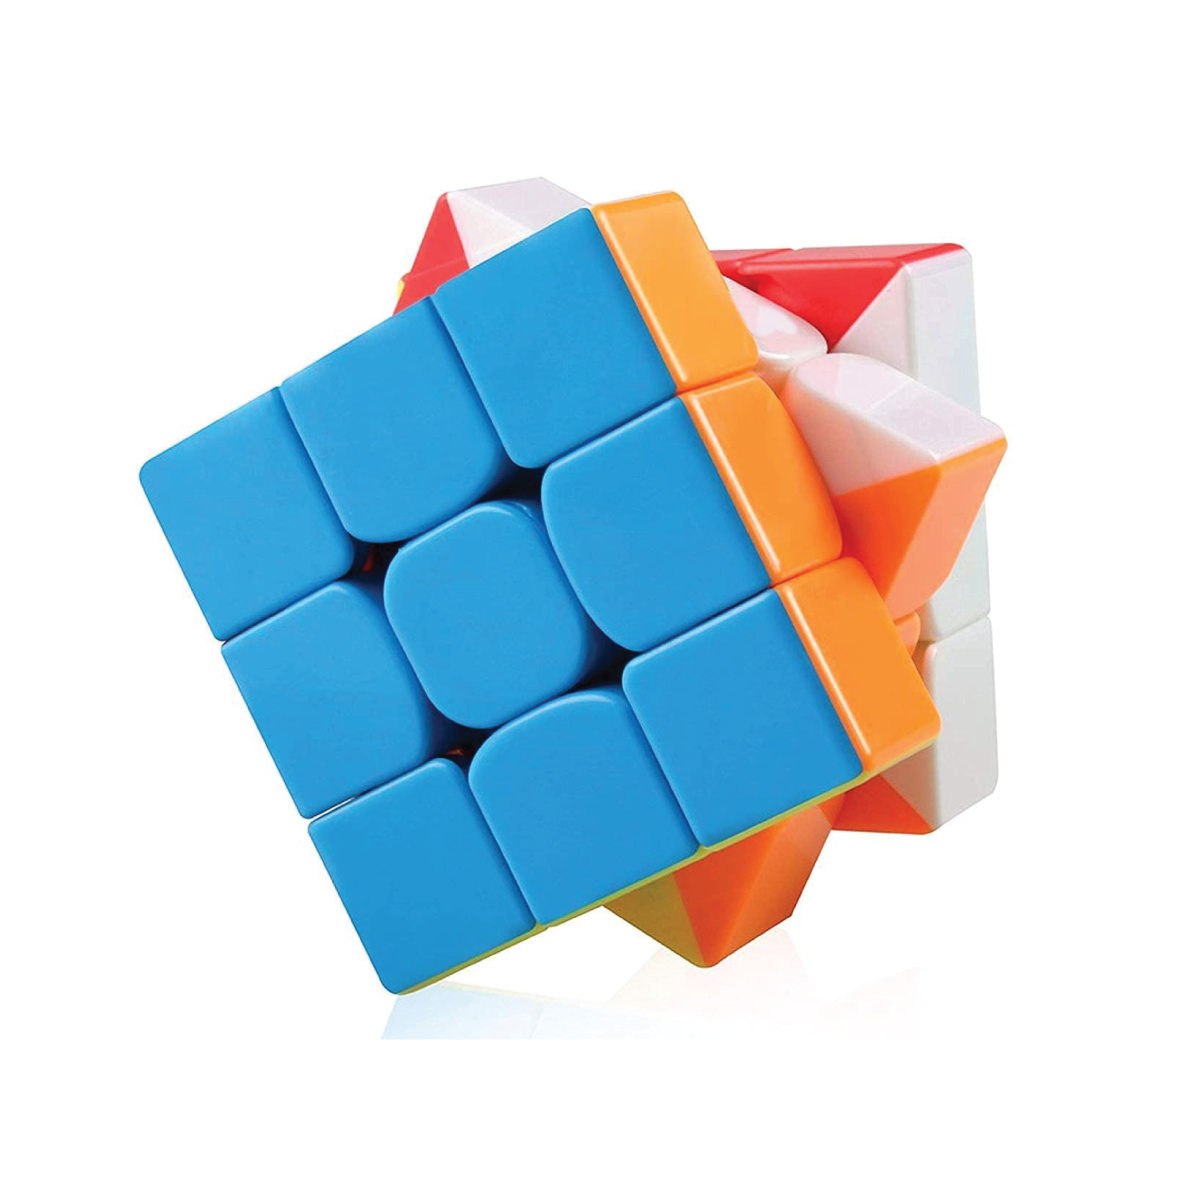 Personalized Multicolor Logo 4 Side Printed Rubik's Cube - For Client, Dealer, or Corporate Gifting, Events Promotional Freebie BGP10